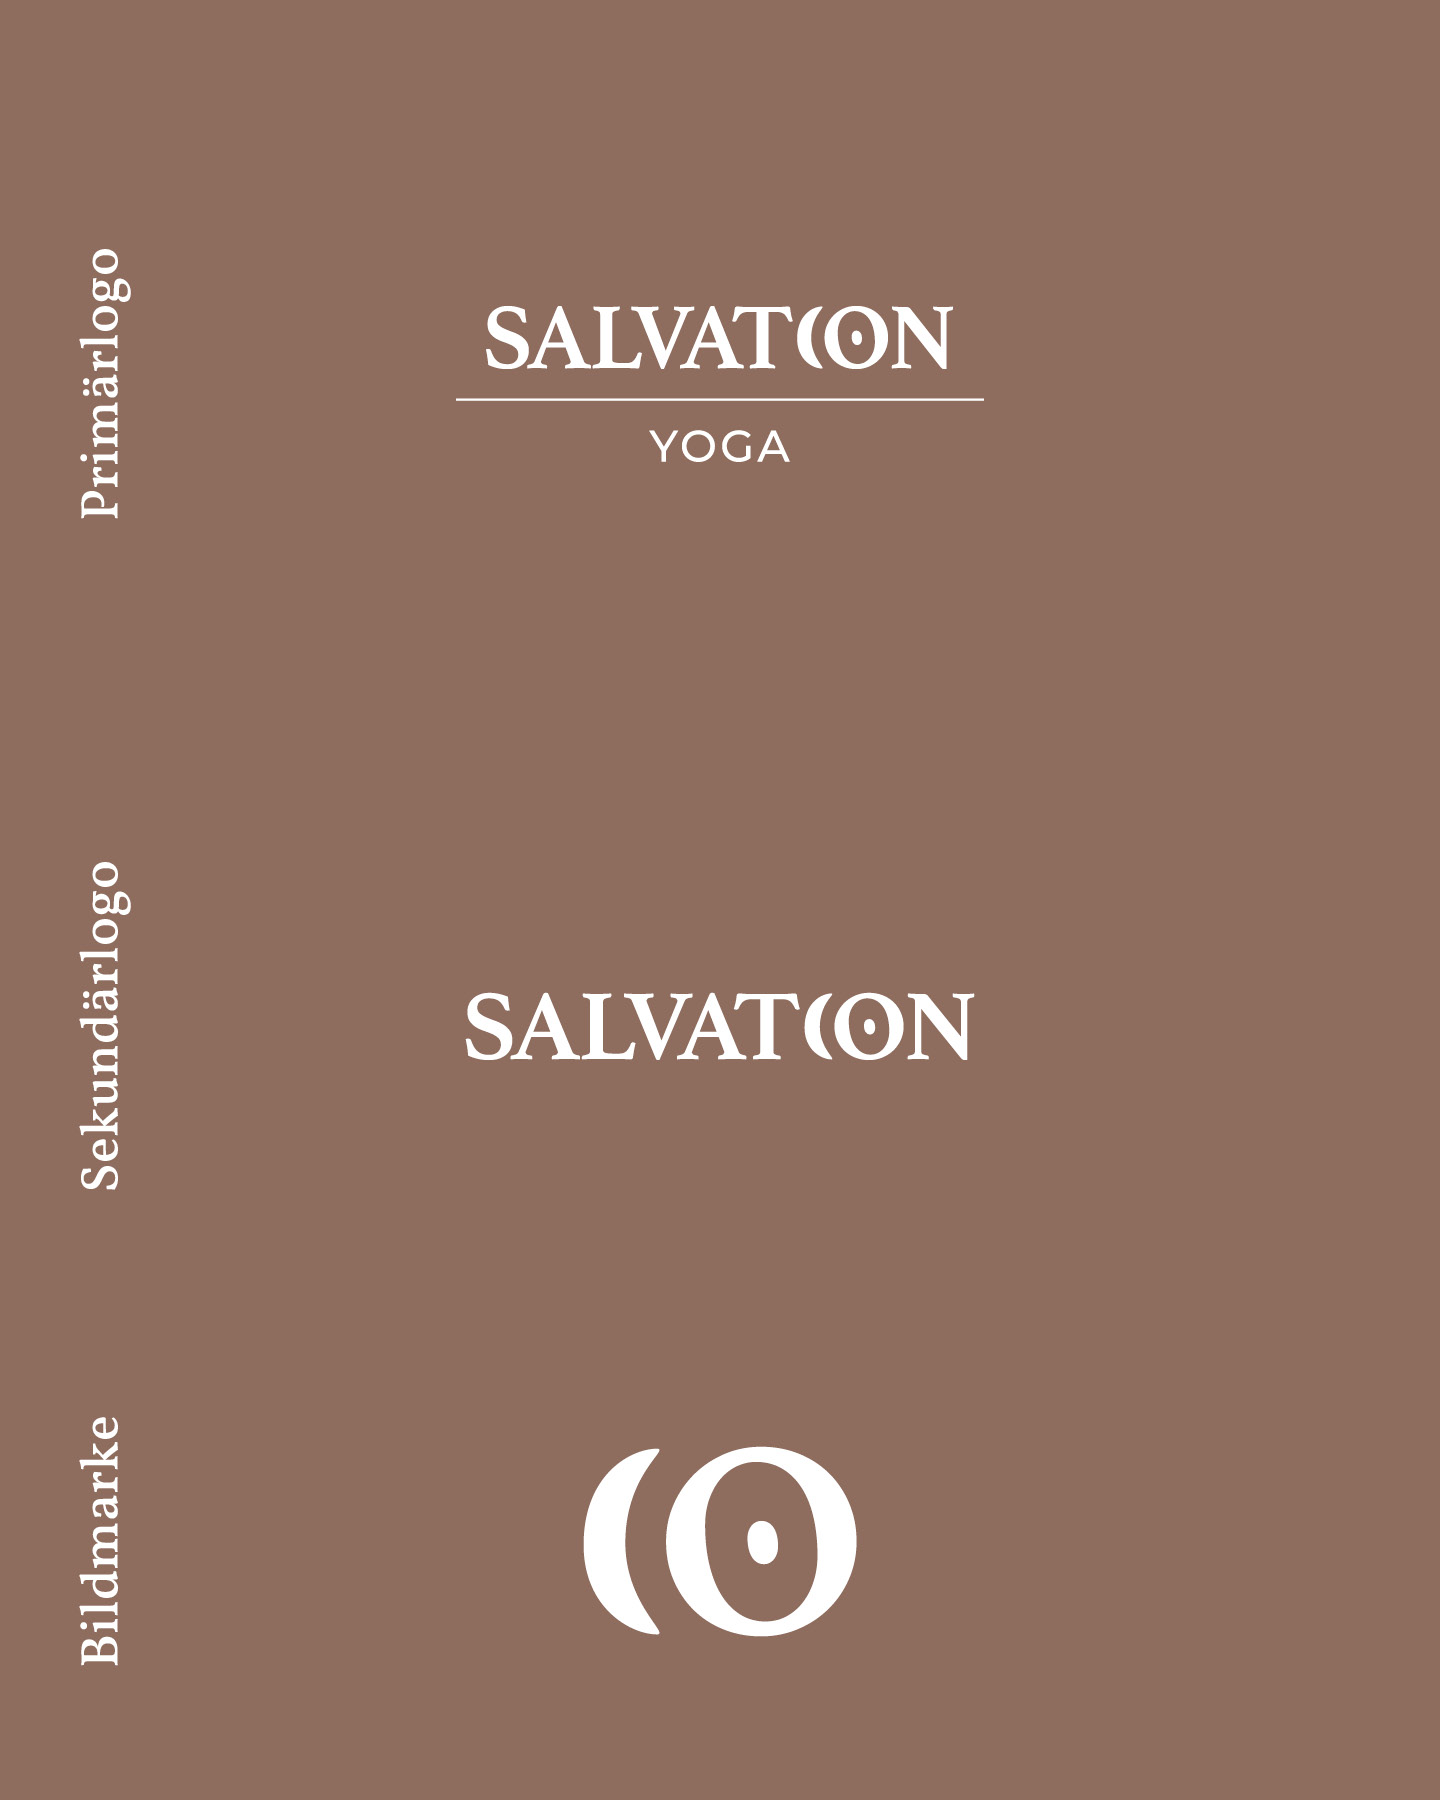 logos overview of salvation yoga - by corliss design